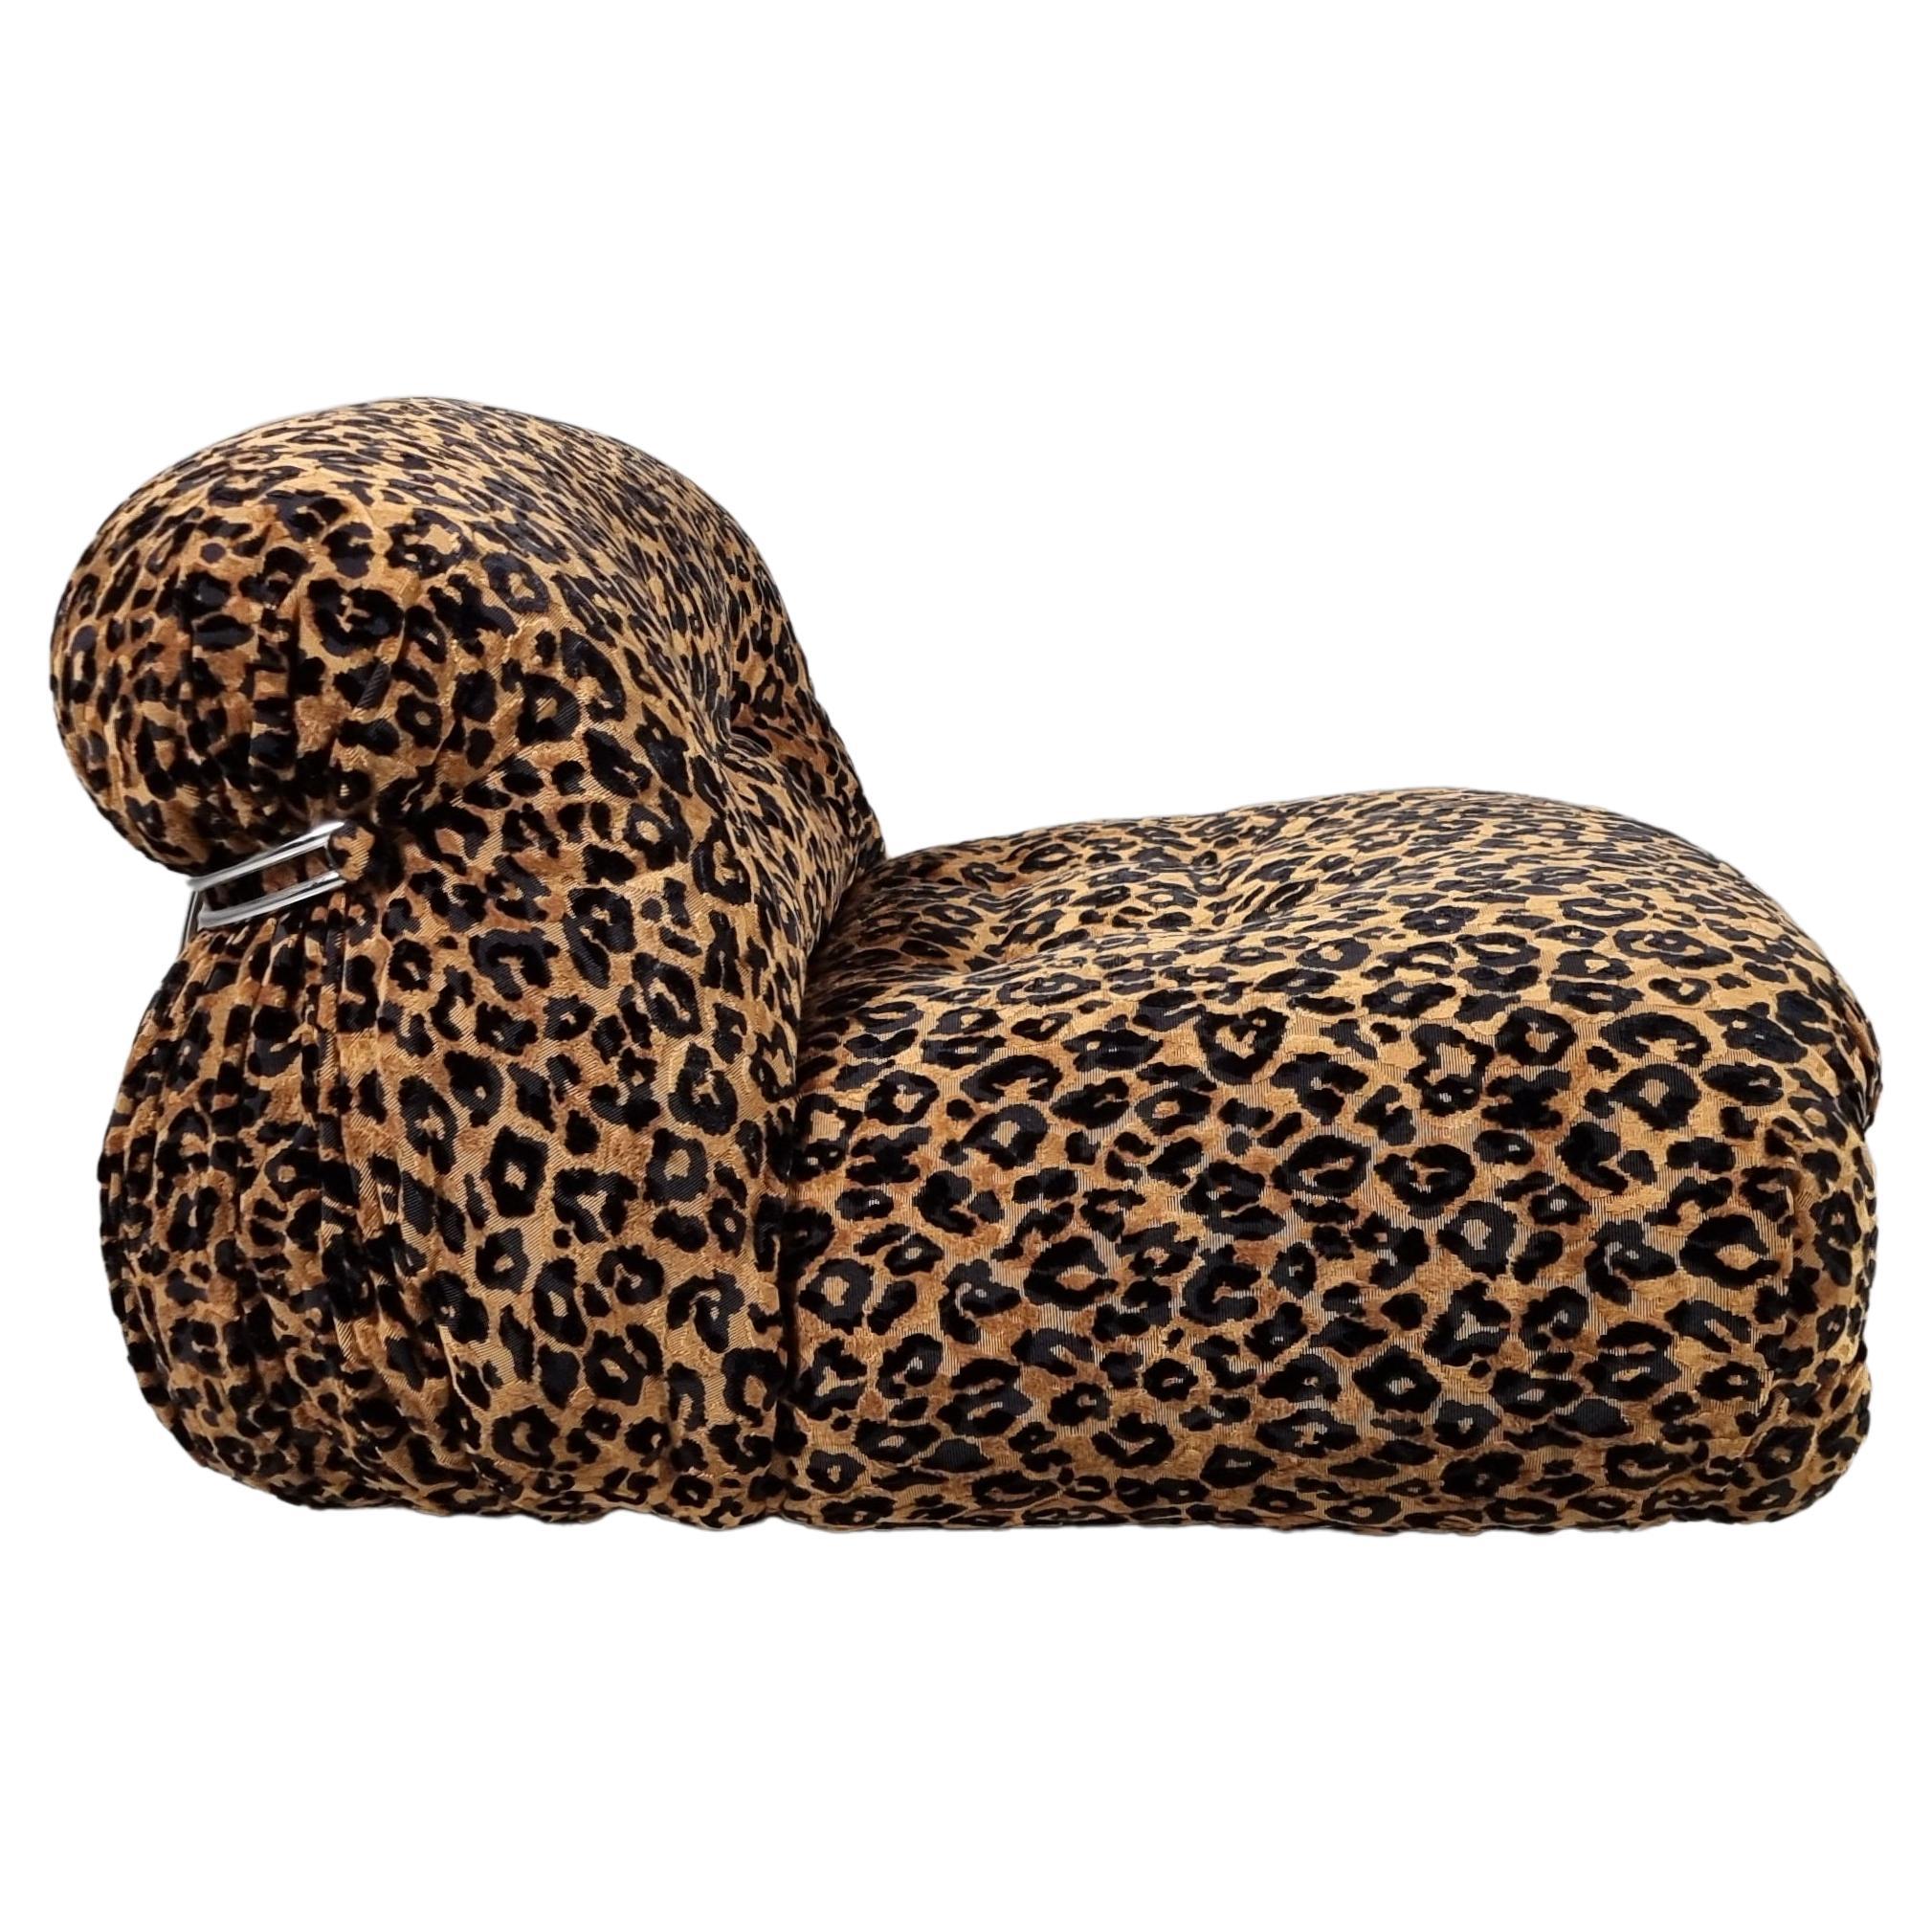 Soriana chair by Afra & Tobia Scarpa for Cassina, Italy, 1970. Reupholstered in this amazing leopard structured velvet fabric by Temperley London. It fits so well with the characteristic round and bulky shape of the chair.

The concept behind the